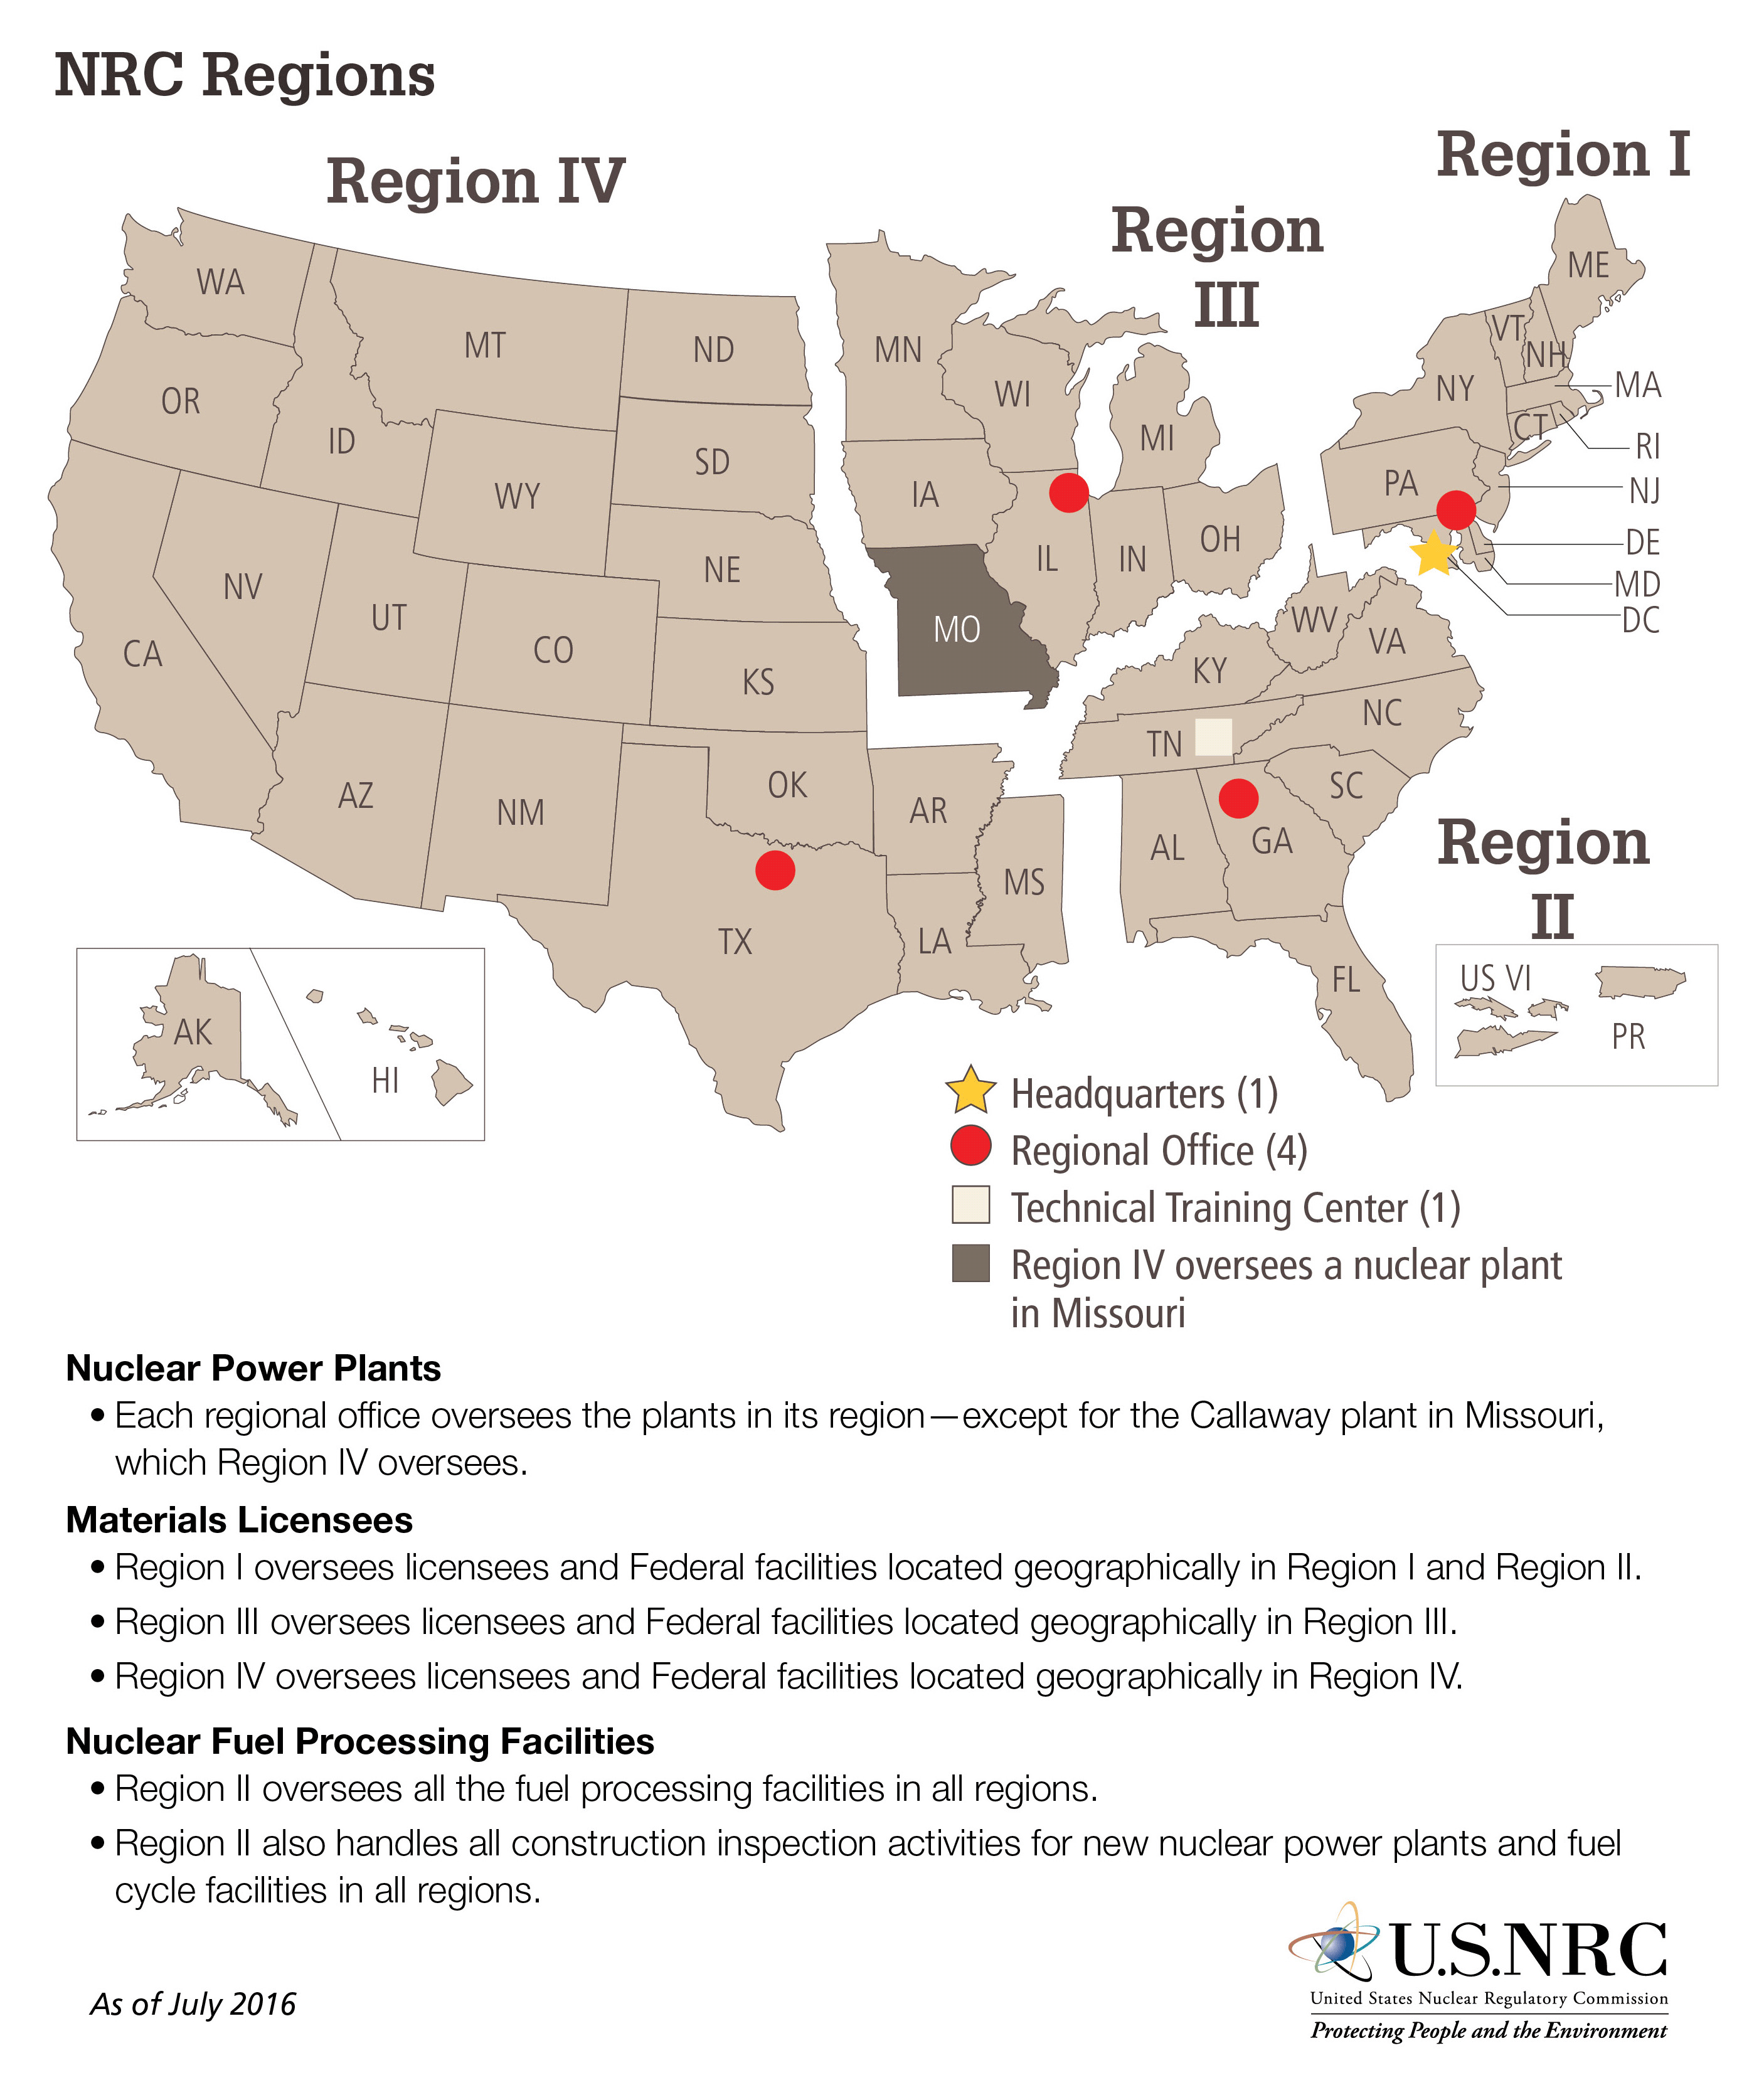 A map image of the NRC Regions consisting of a map of the USA with abbreviated state designations, broken into 4 sections (regions) designated as Region I, Region II, Region III and Region IV; a gold star on the image denotes the location of NRC Headquarters; a red dot on the image denotes the location of one of the 4 NRC Regional Offices; a white square on the image denotes the location of the Technical Training Center.  A bulleted list below the map image includes the following: Nuclear Power Plants: Each regional office oversees the plants in its region except the Callaway plant in Missouri and the Grand Gulf plant in Mississippi, which Region IV oversee. Materials Licensees: Region I oversees licensees and Federal facilities located geographically in Region I and Region II. Region III oversees licensees and Federal facilities located geographically in Region III. Region IV oversees licensees and Federal facilities located geographically in Region IV. Nuclear Fuel Processing Facilities: Region II oversees all the fuel processing facilities in the region and those in Illinois, New Mexico, and Washington. Region II also handles all construction inspectors' activities for new nuclear power plants and fuel cycle facilities in all regions.